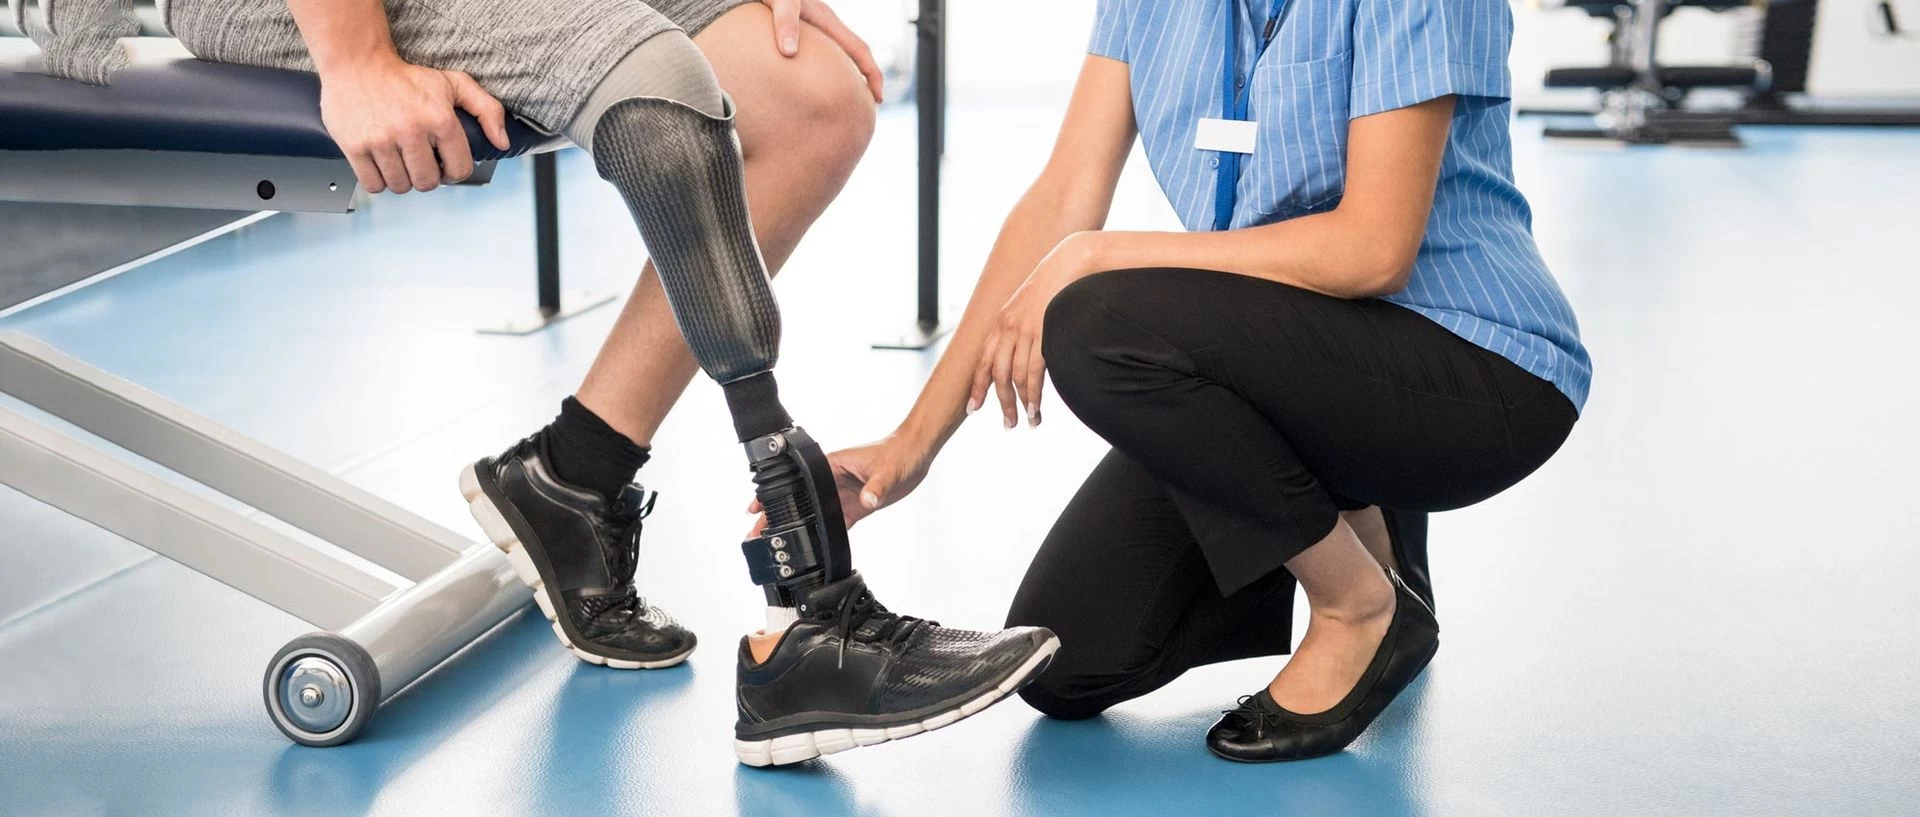 What Should You Know About Prostheses and Orthotics?